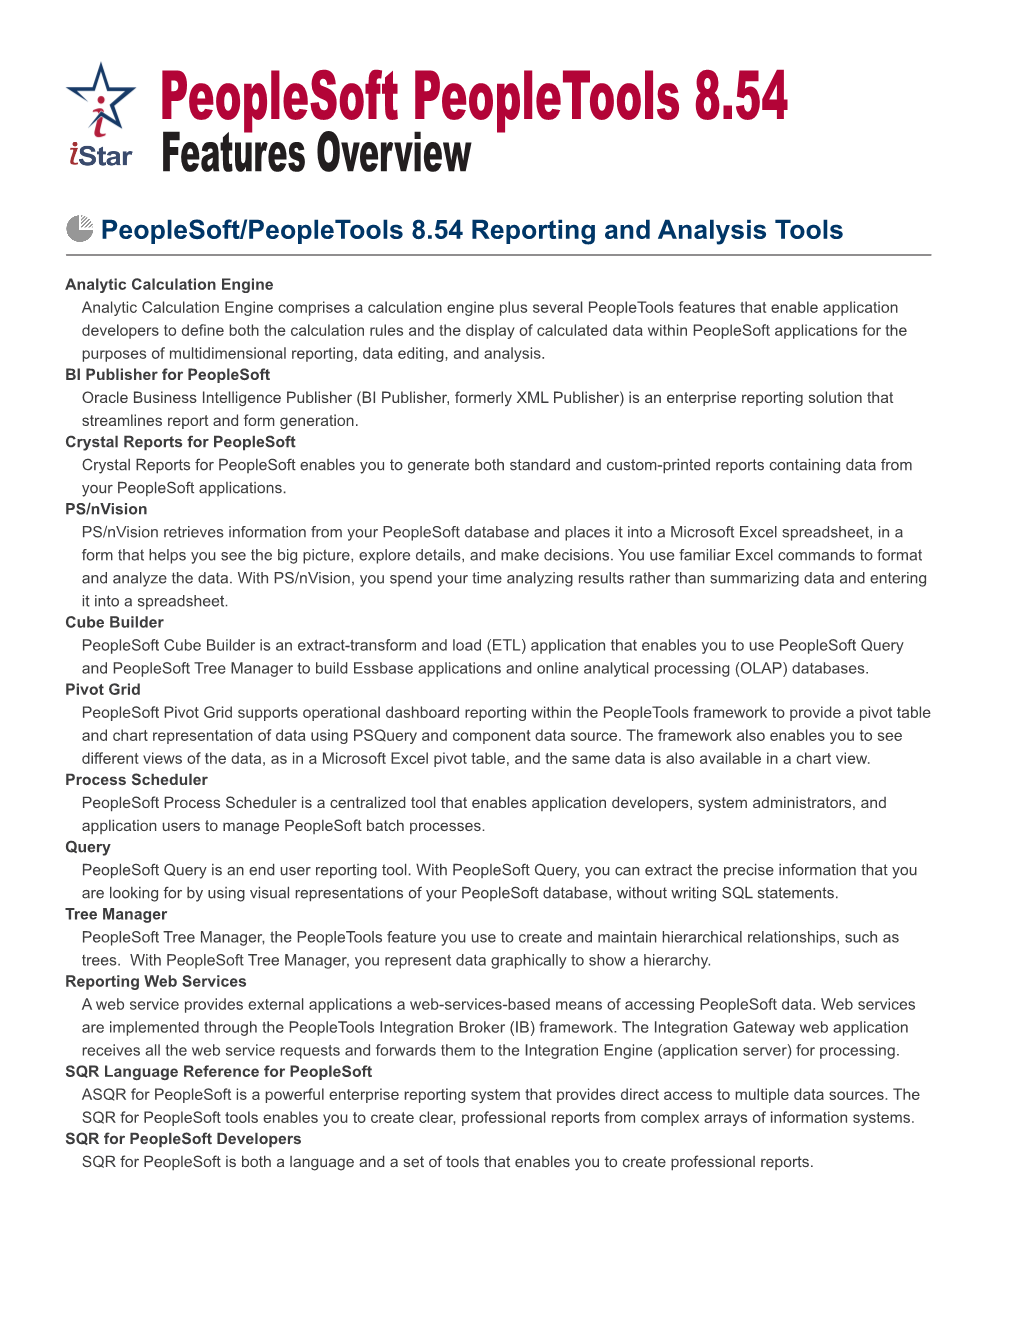 Peoplesoft Peopletools 8.54 Features Overview